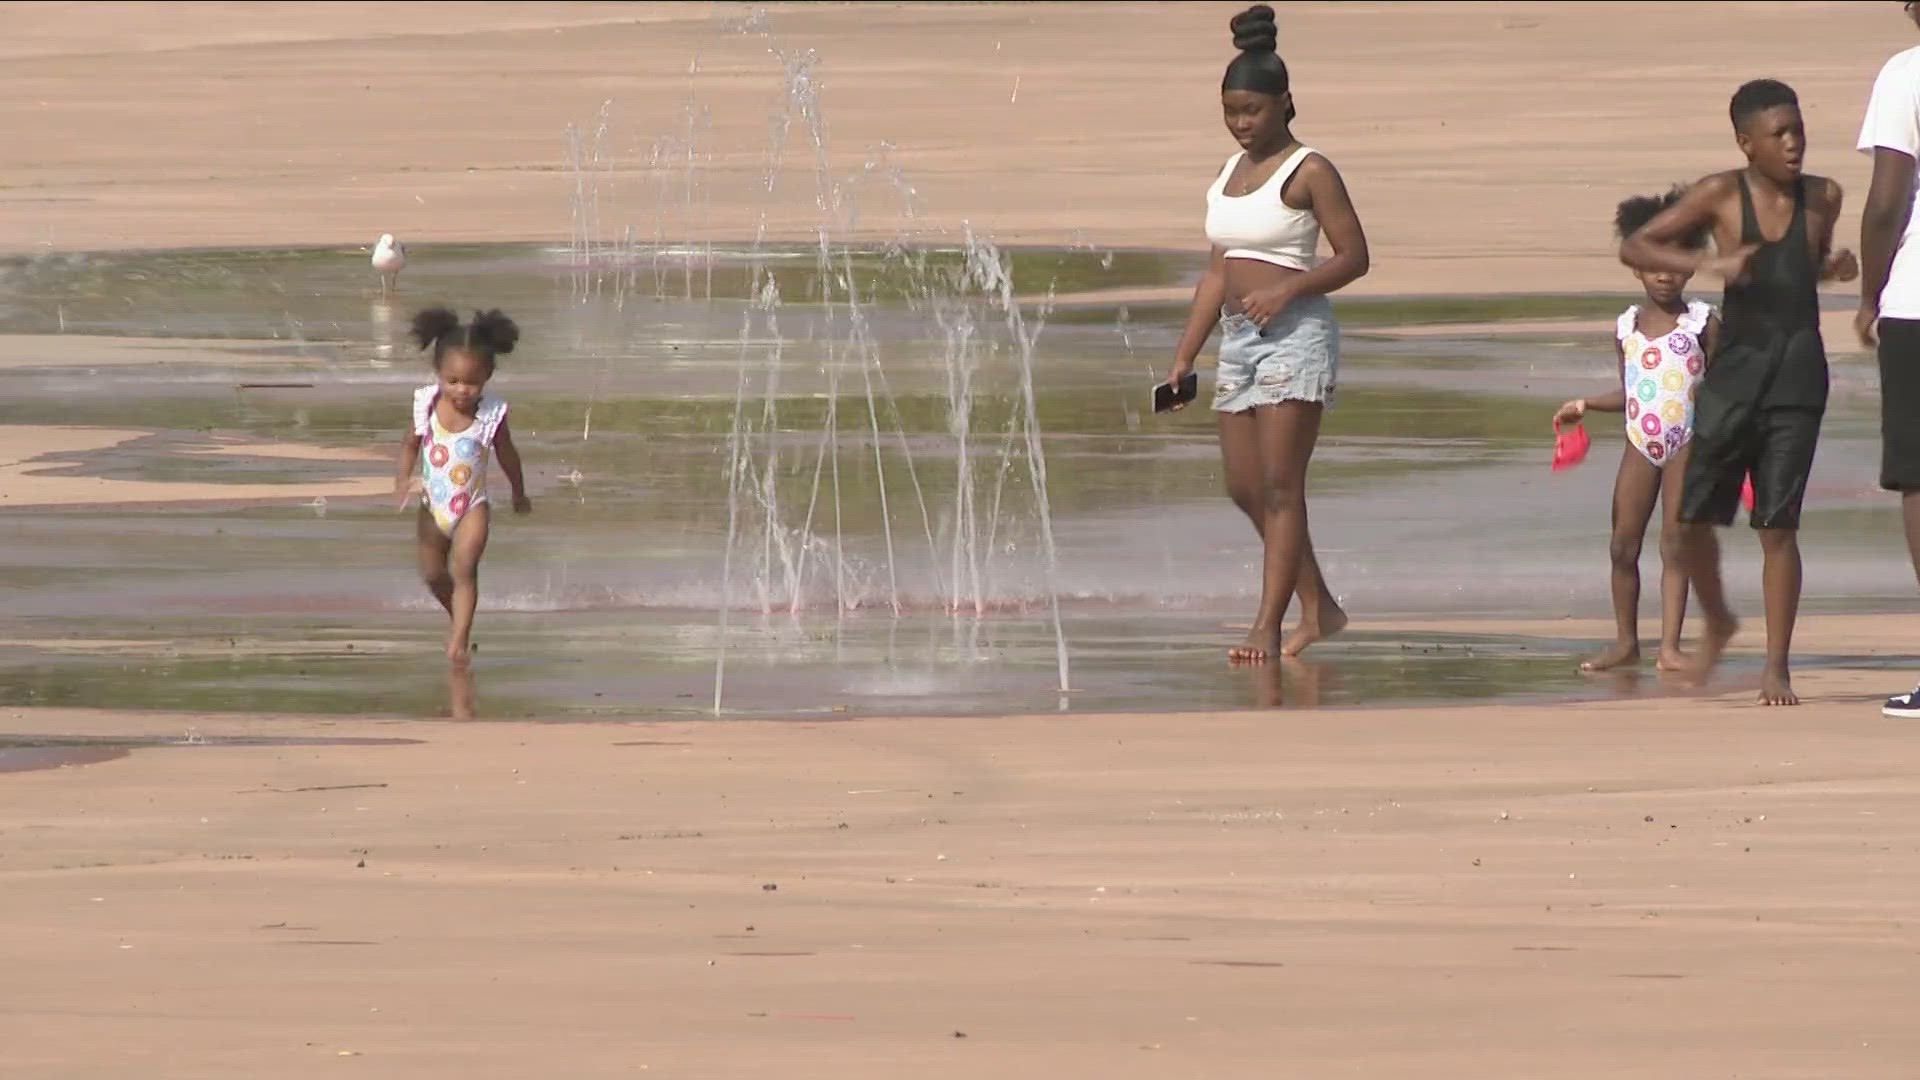 Residents of the city now have their choice of ten different splash pads to beat the heat.